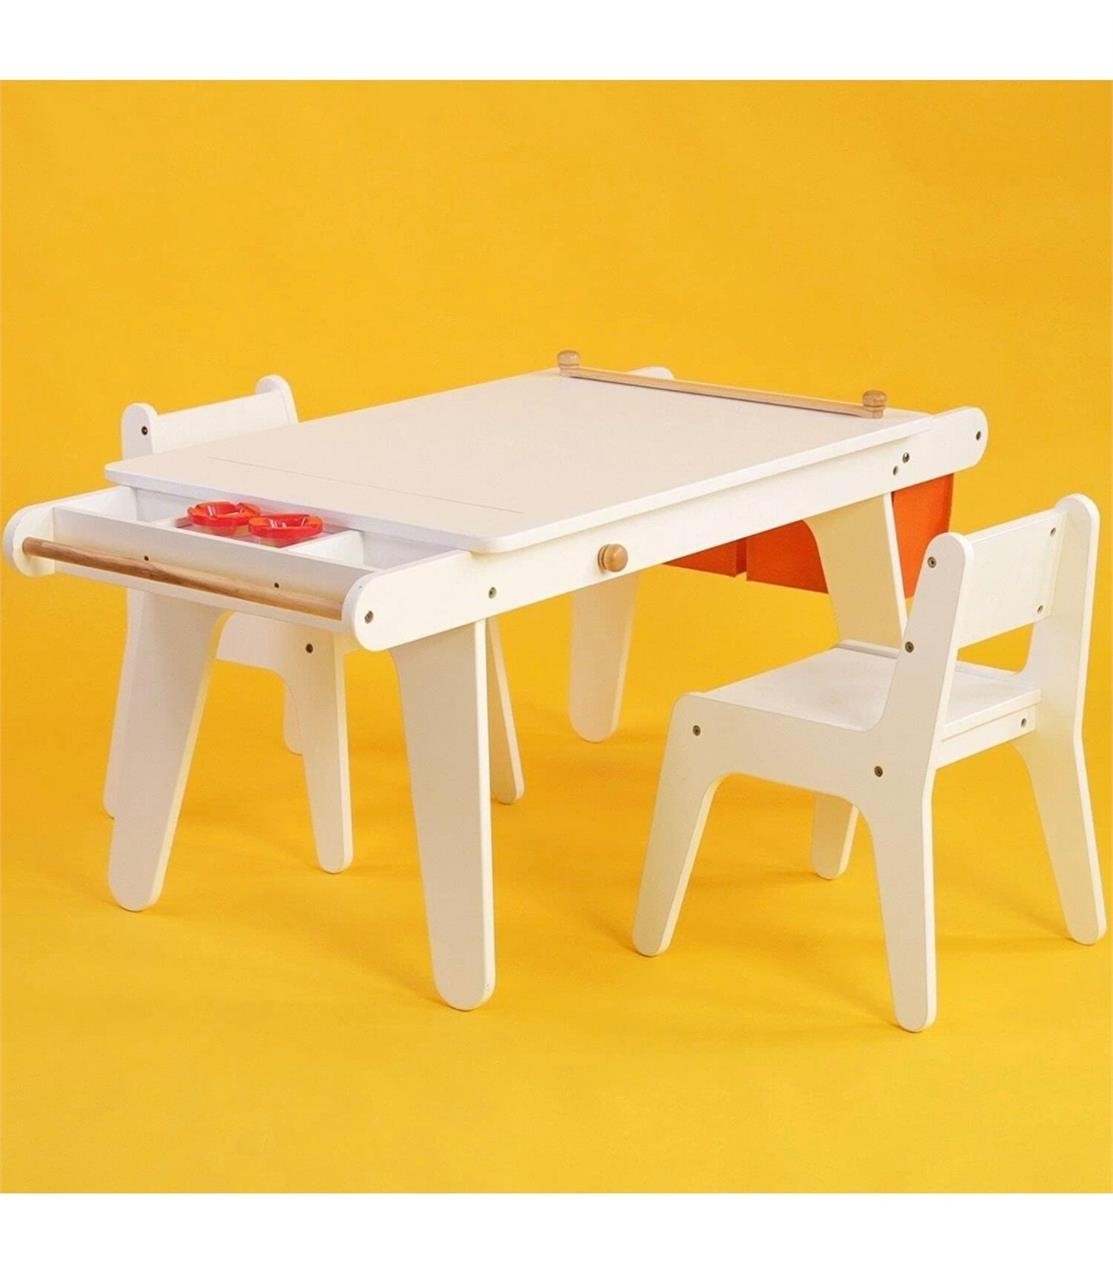 NEW $350 Kids Table and Chair Set